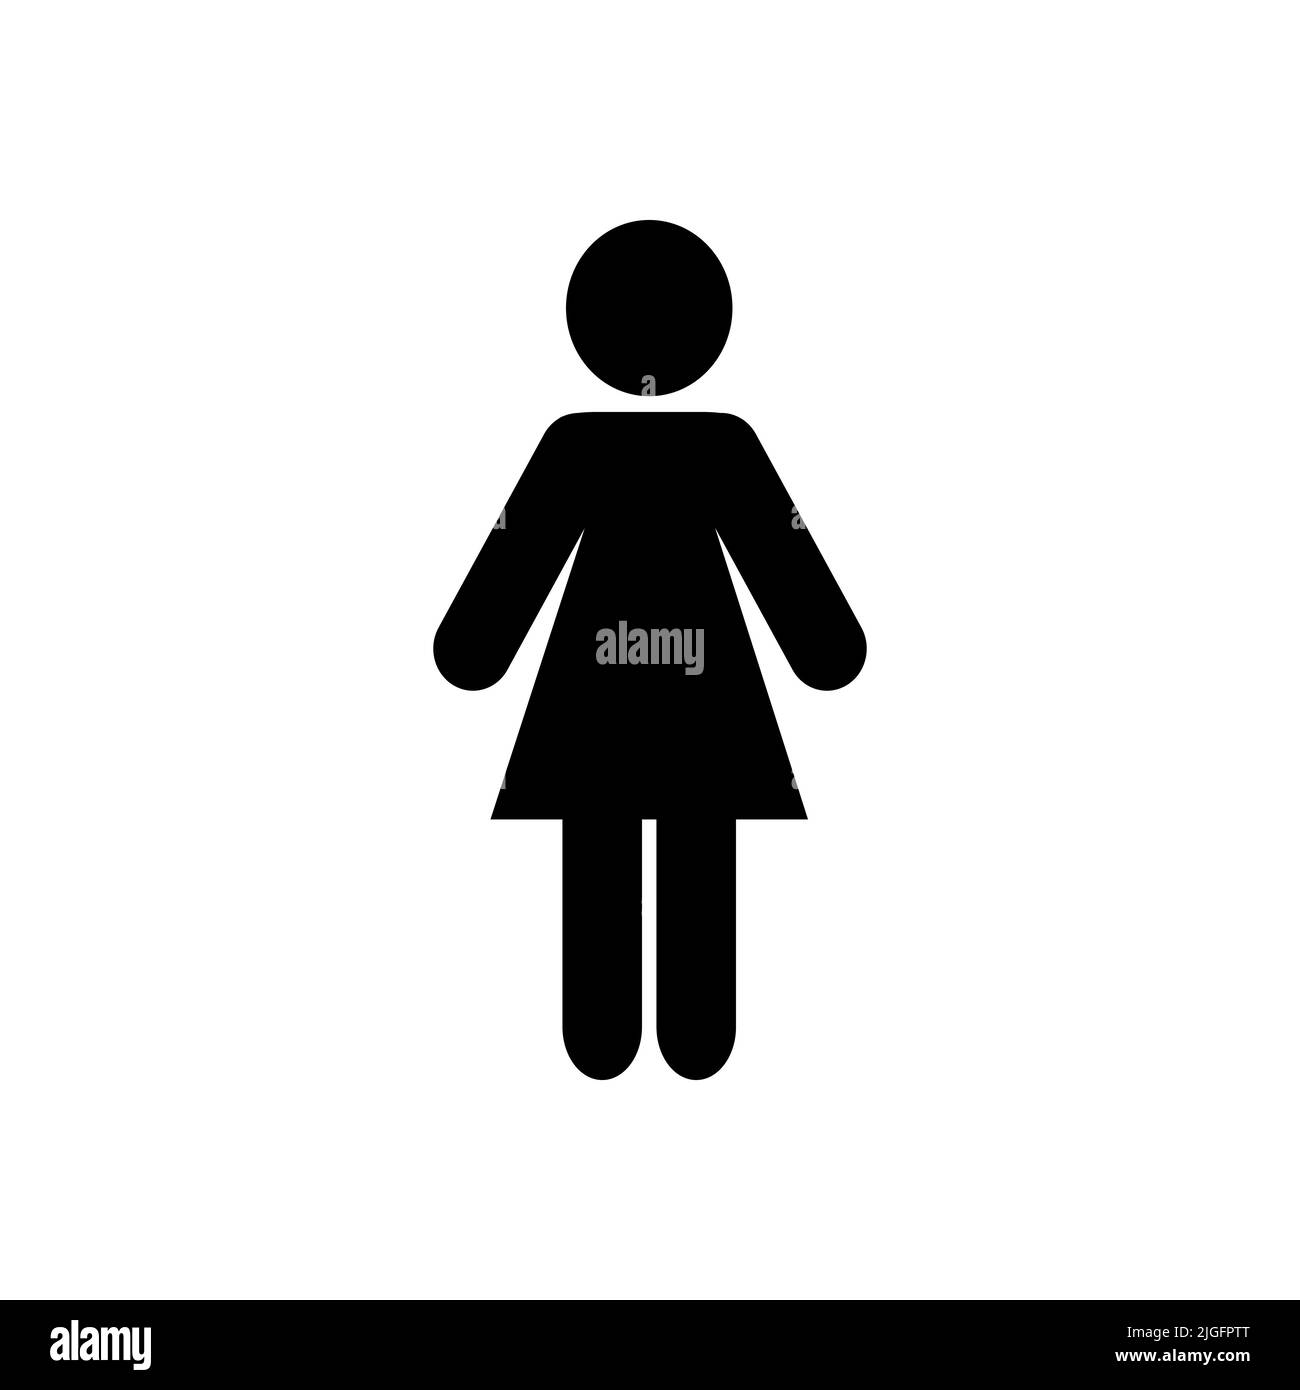 Woman icon. Lady rest room sign. Vector illustration. Black silhouette isolated on white background Stock Vector